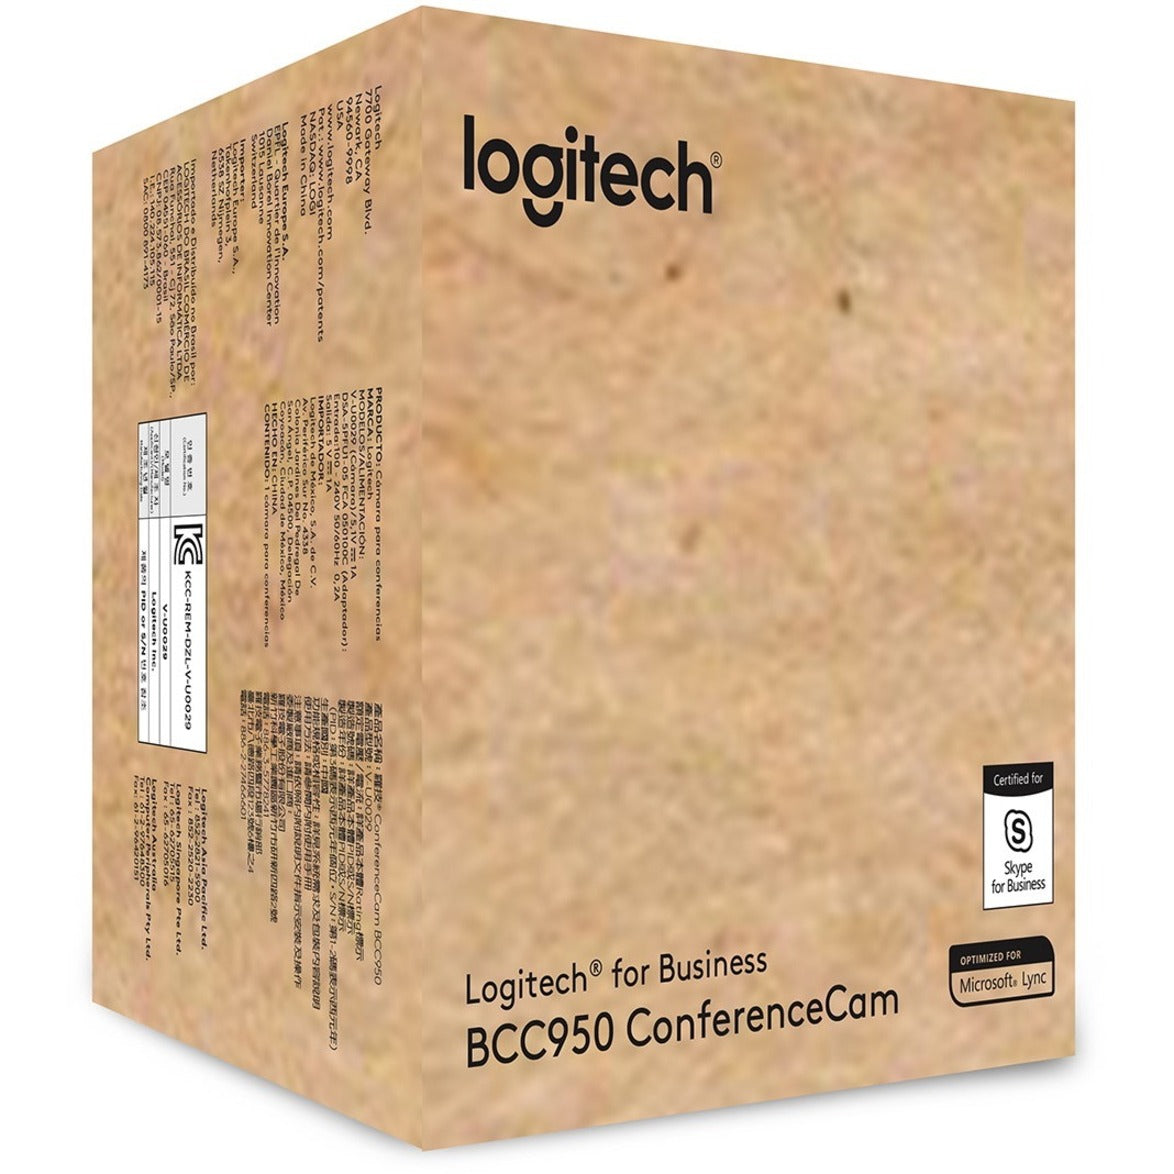 Logitech 960-000866 BCC950 Conferencecam, Full HD Video Conferencing Camera